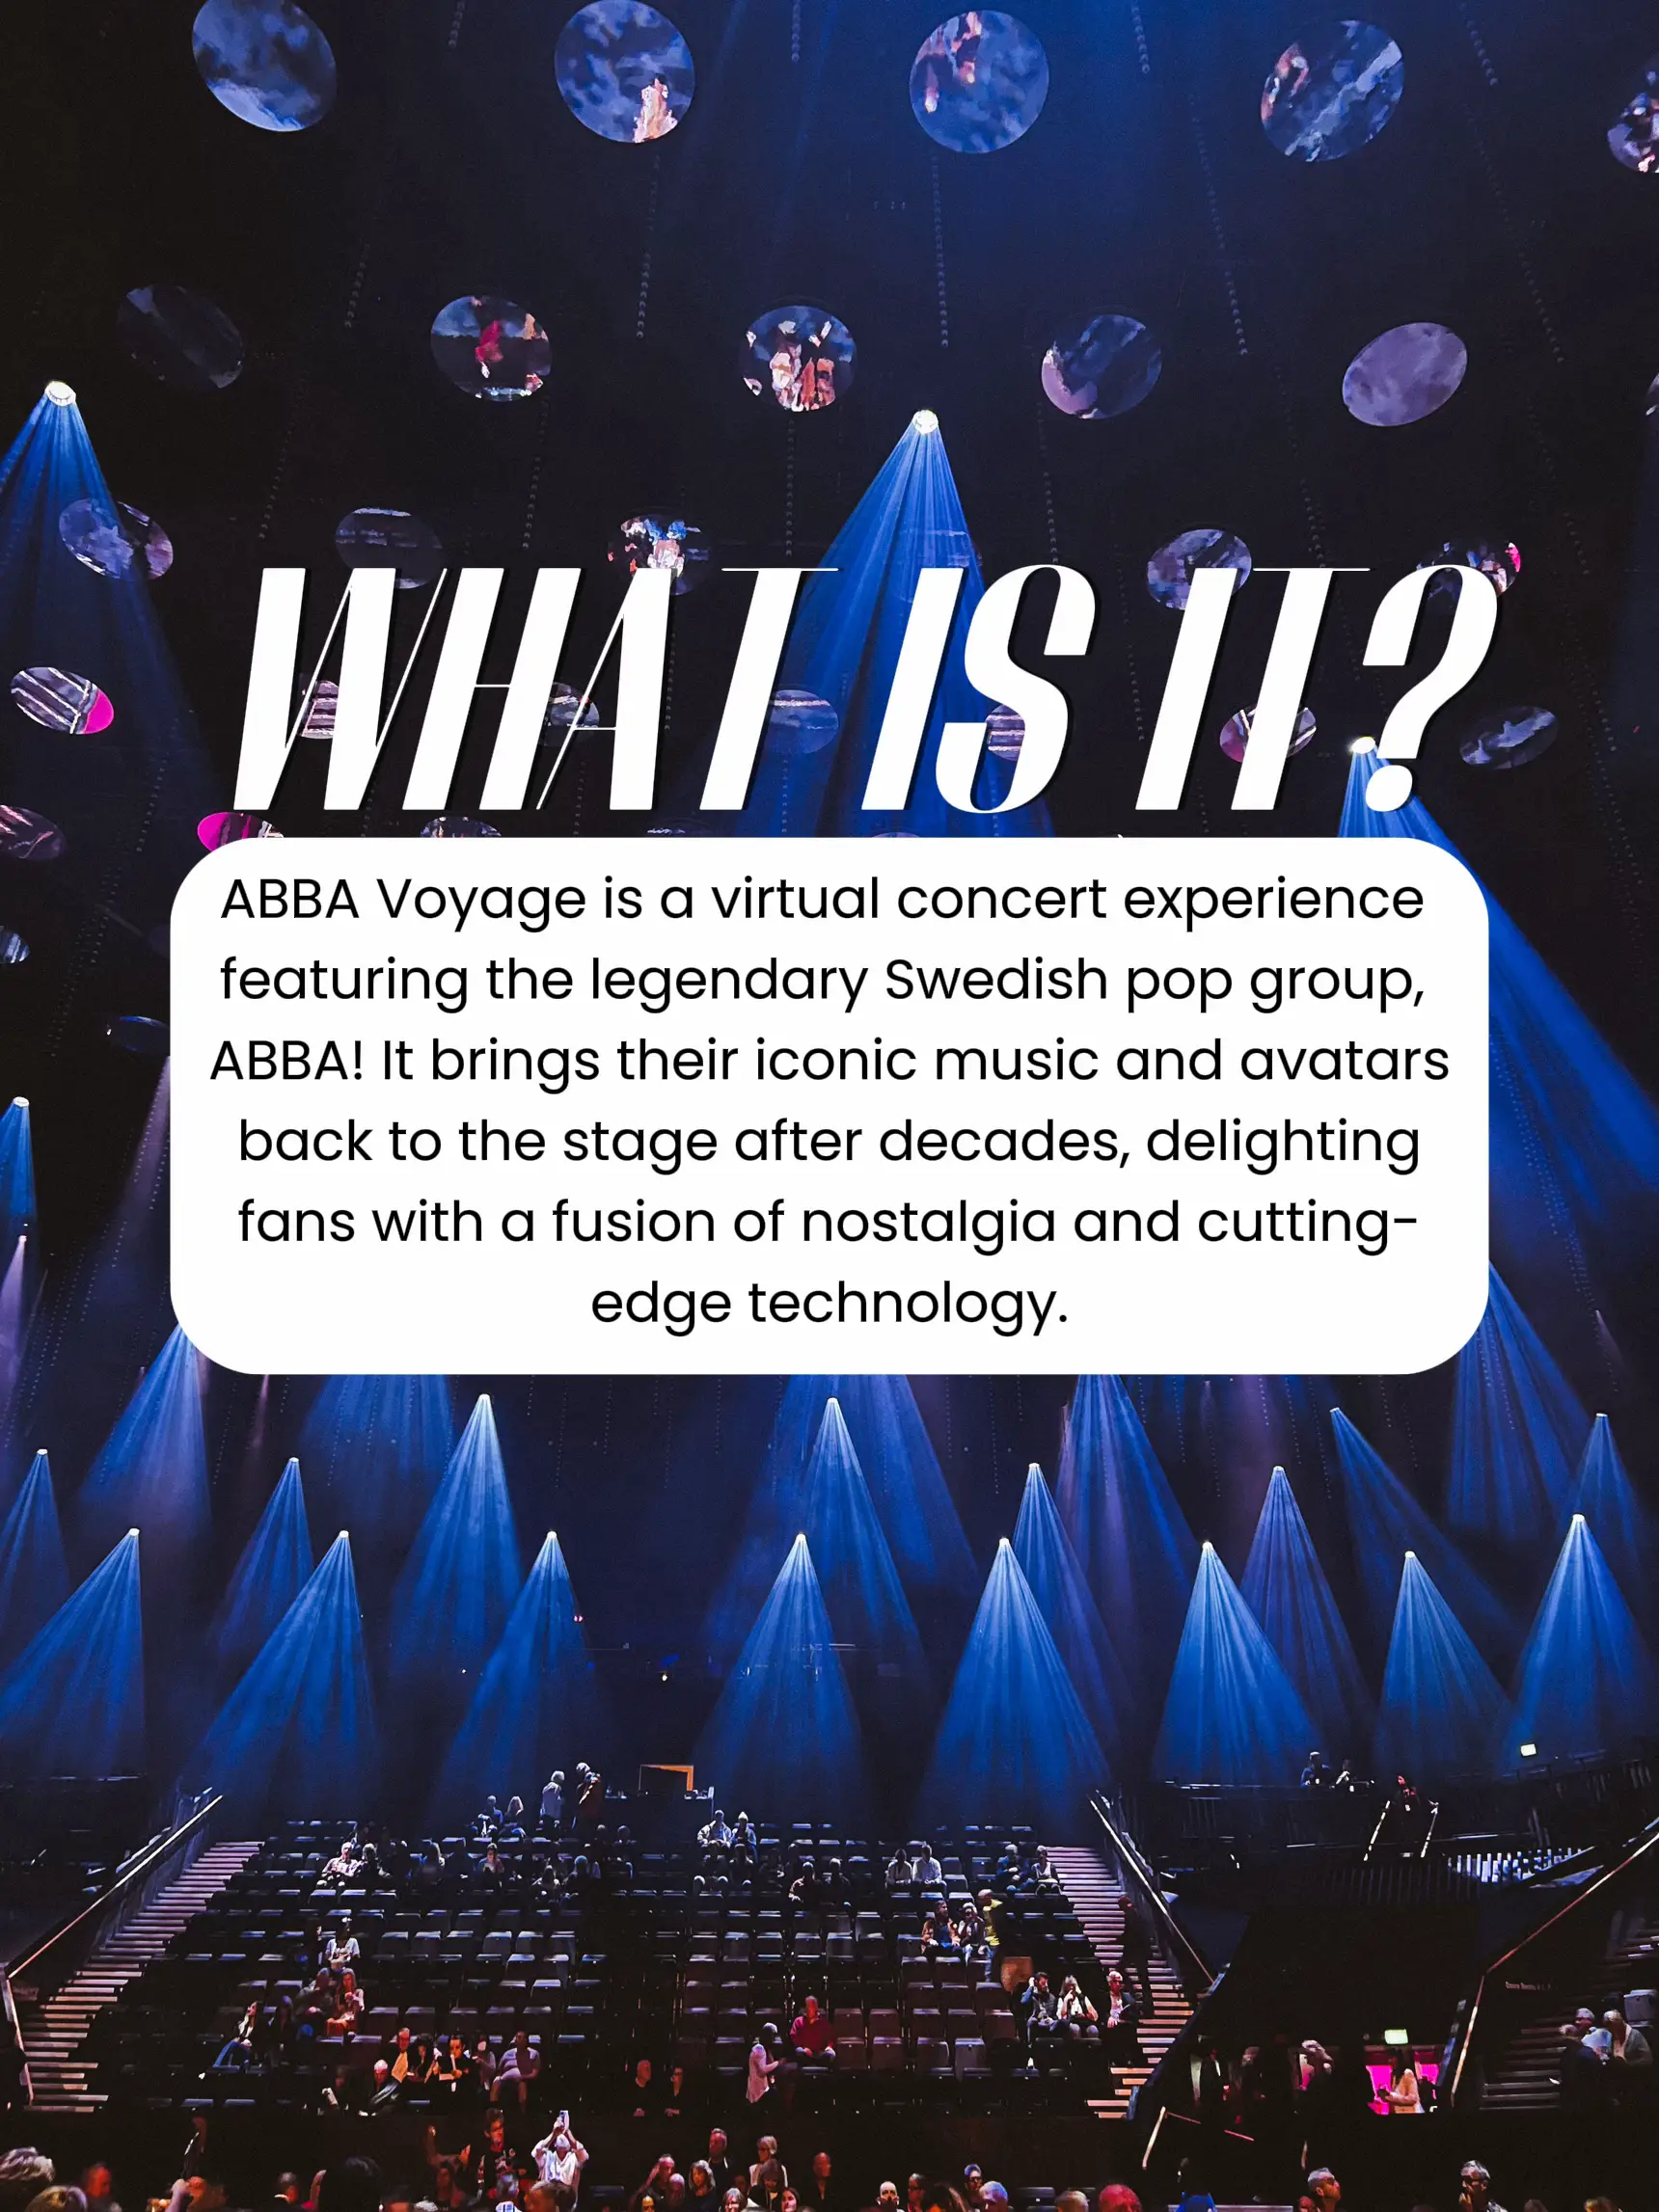  A virtual concert experience featuring the legendary Swedish pop group,ABBA!